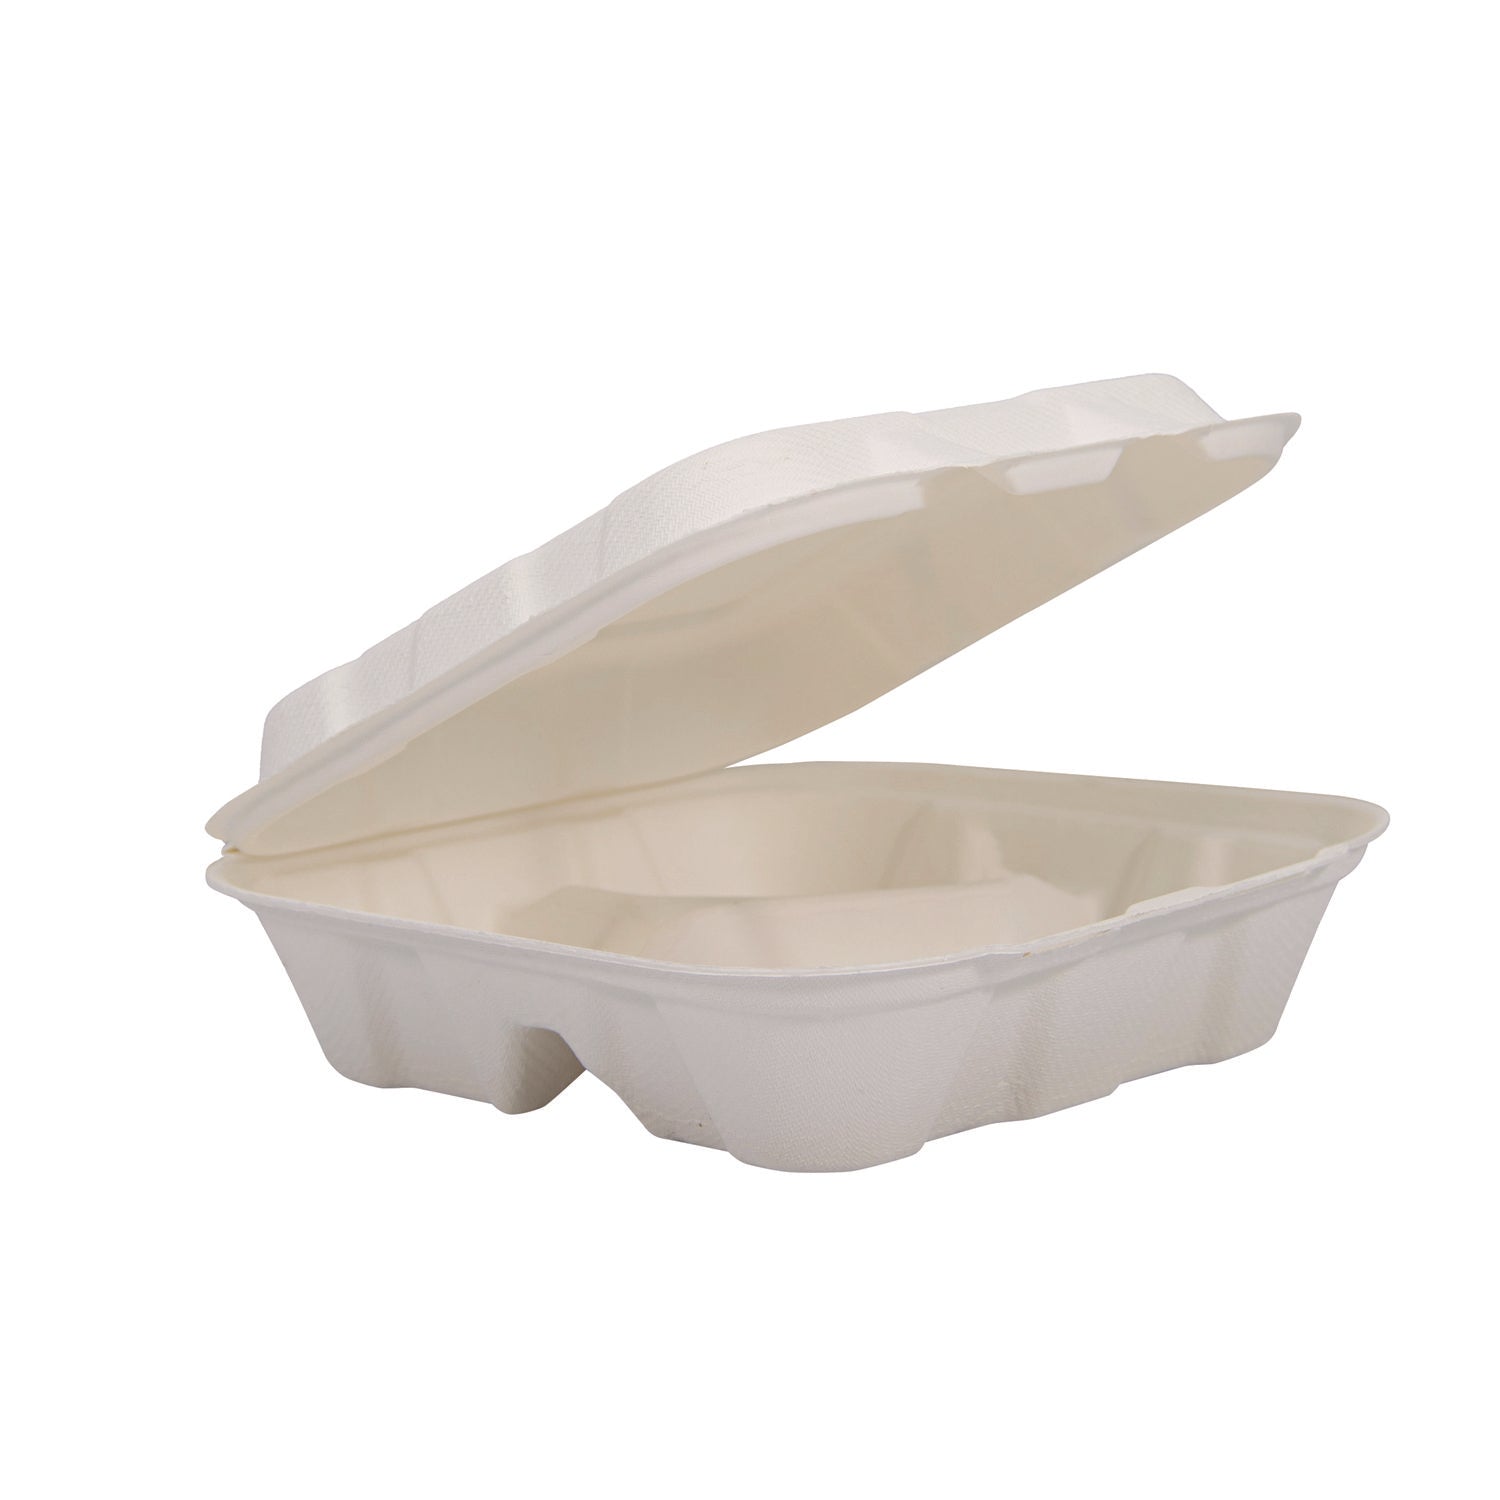 compostable-fiber-hinged-trays-proplanet-seal-3-compartment-803-x-84-x-193-ivory-molded-fiber-200-carton_dcchc8fbr3 - 1